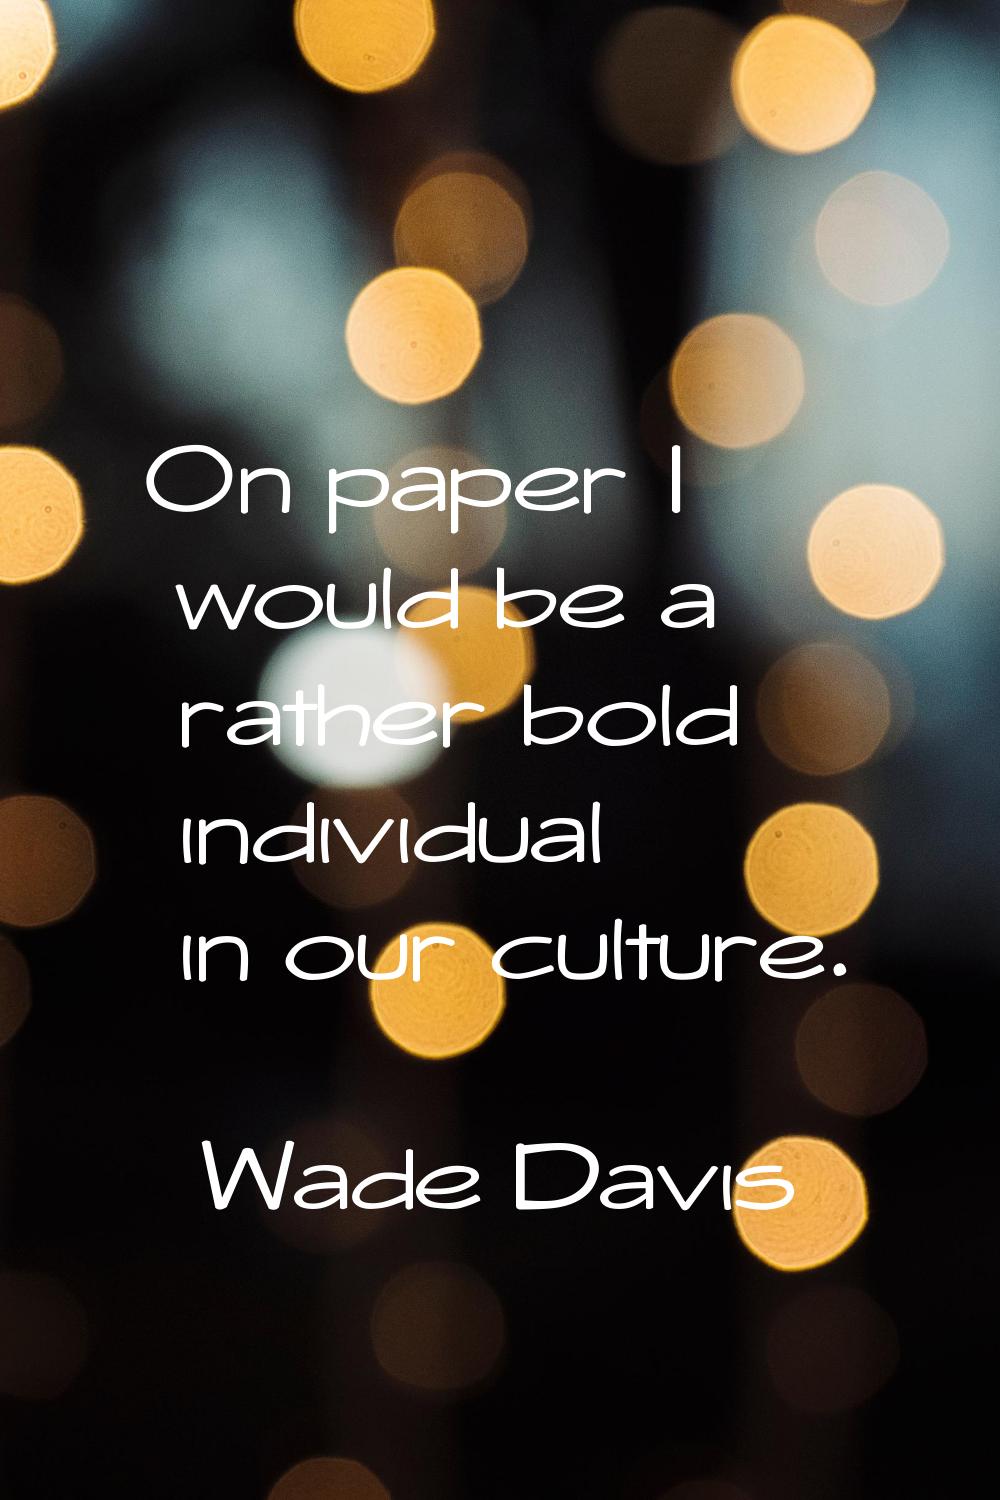 On paper I would be a rather bold individual in our culture.